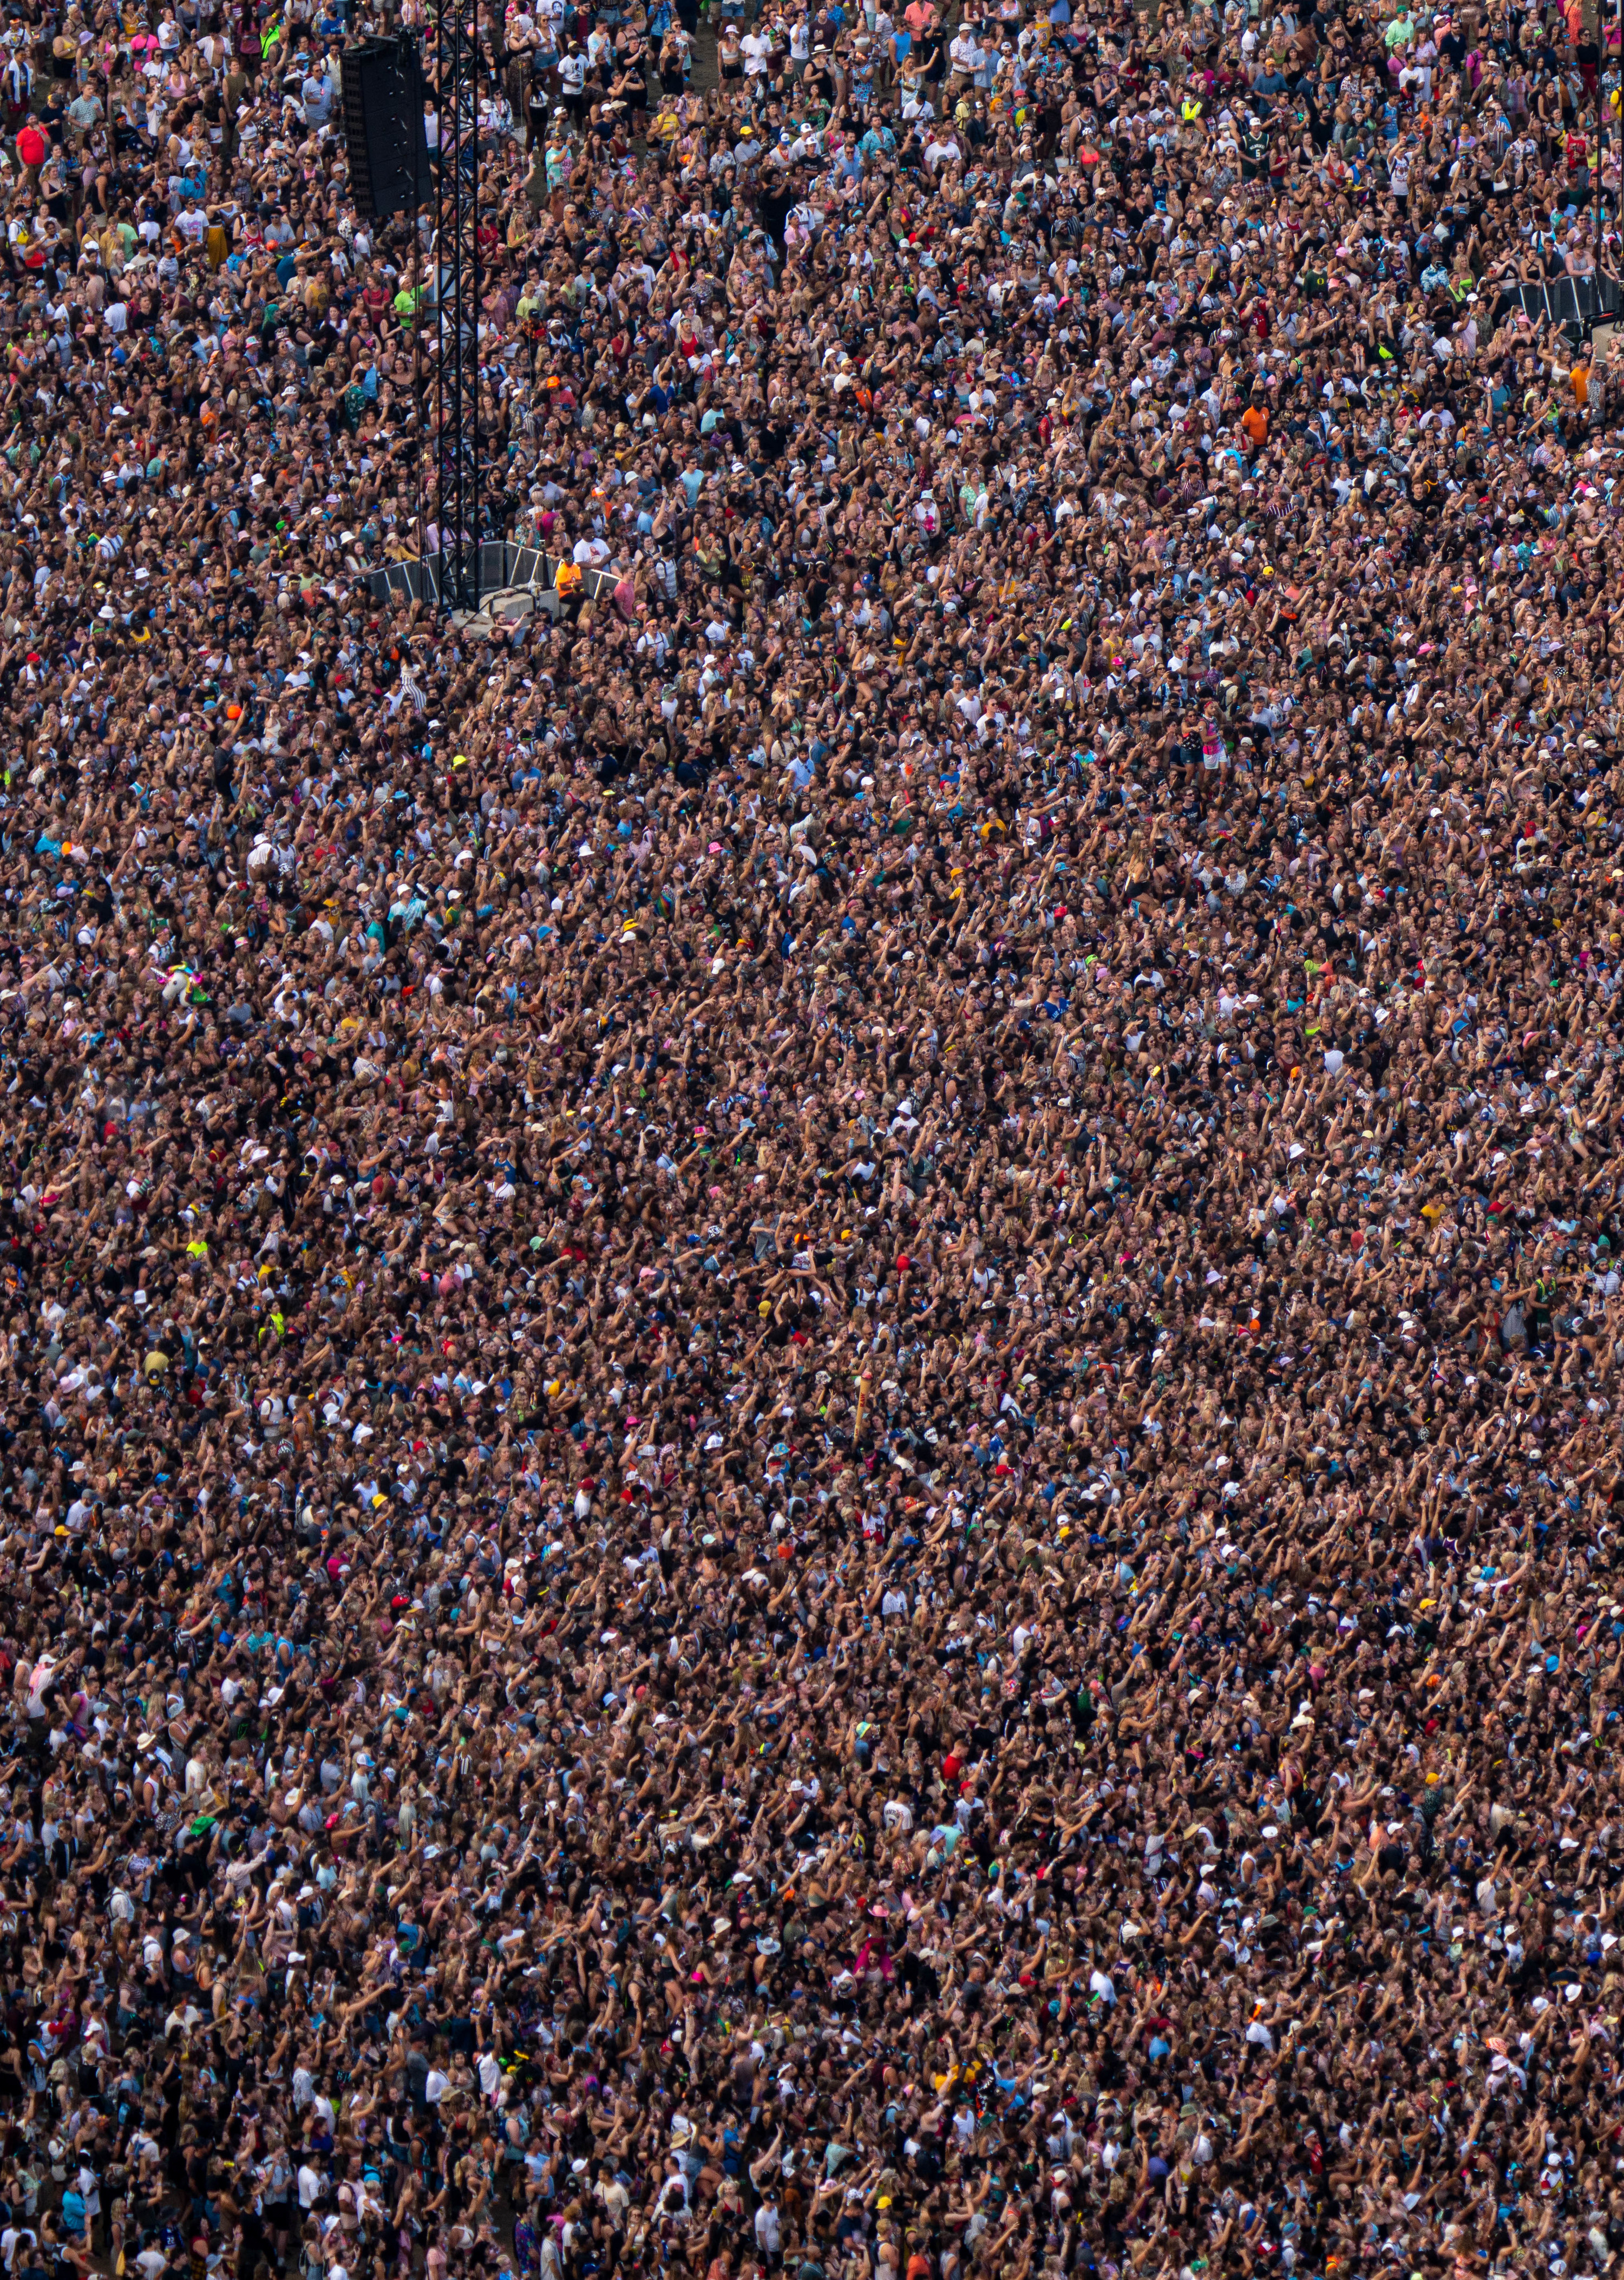 Thousands of people fill the crowd at Lollapalooza music festival in Chicago as seen from above.